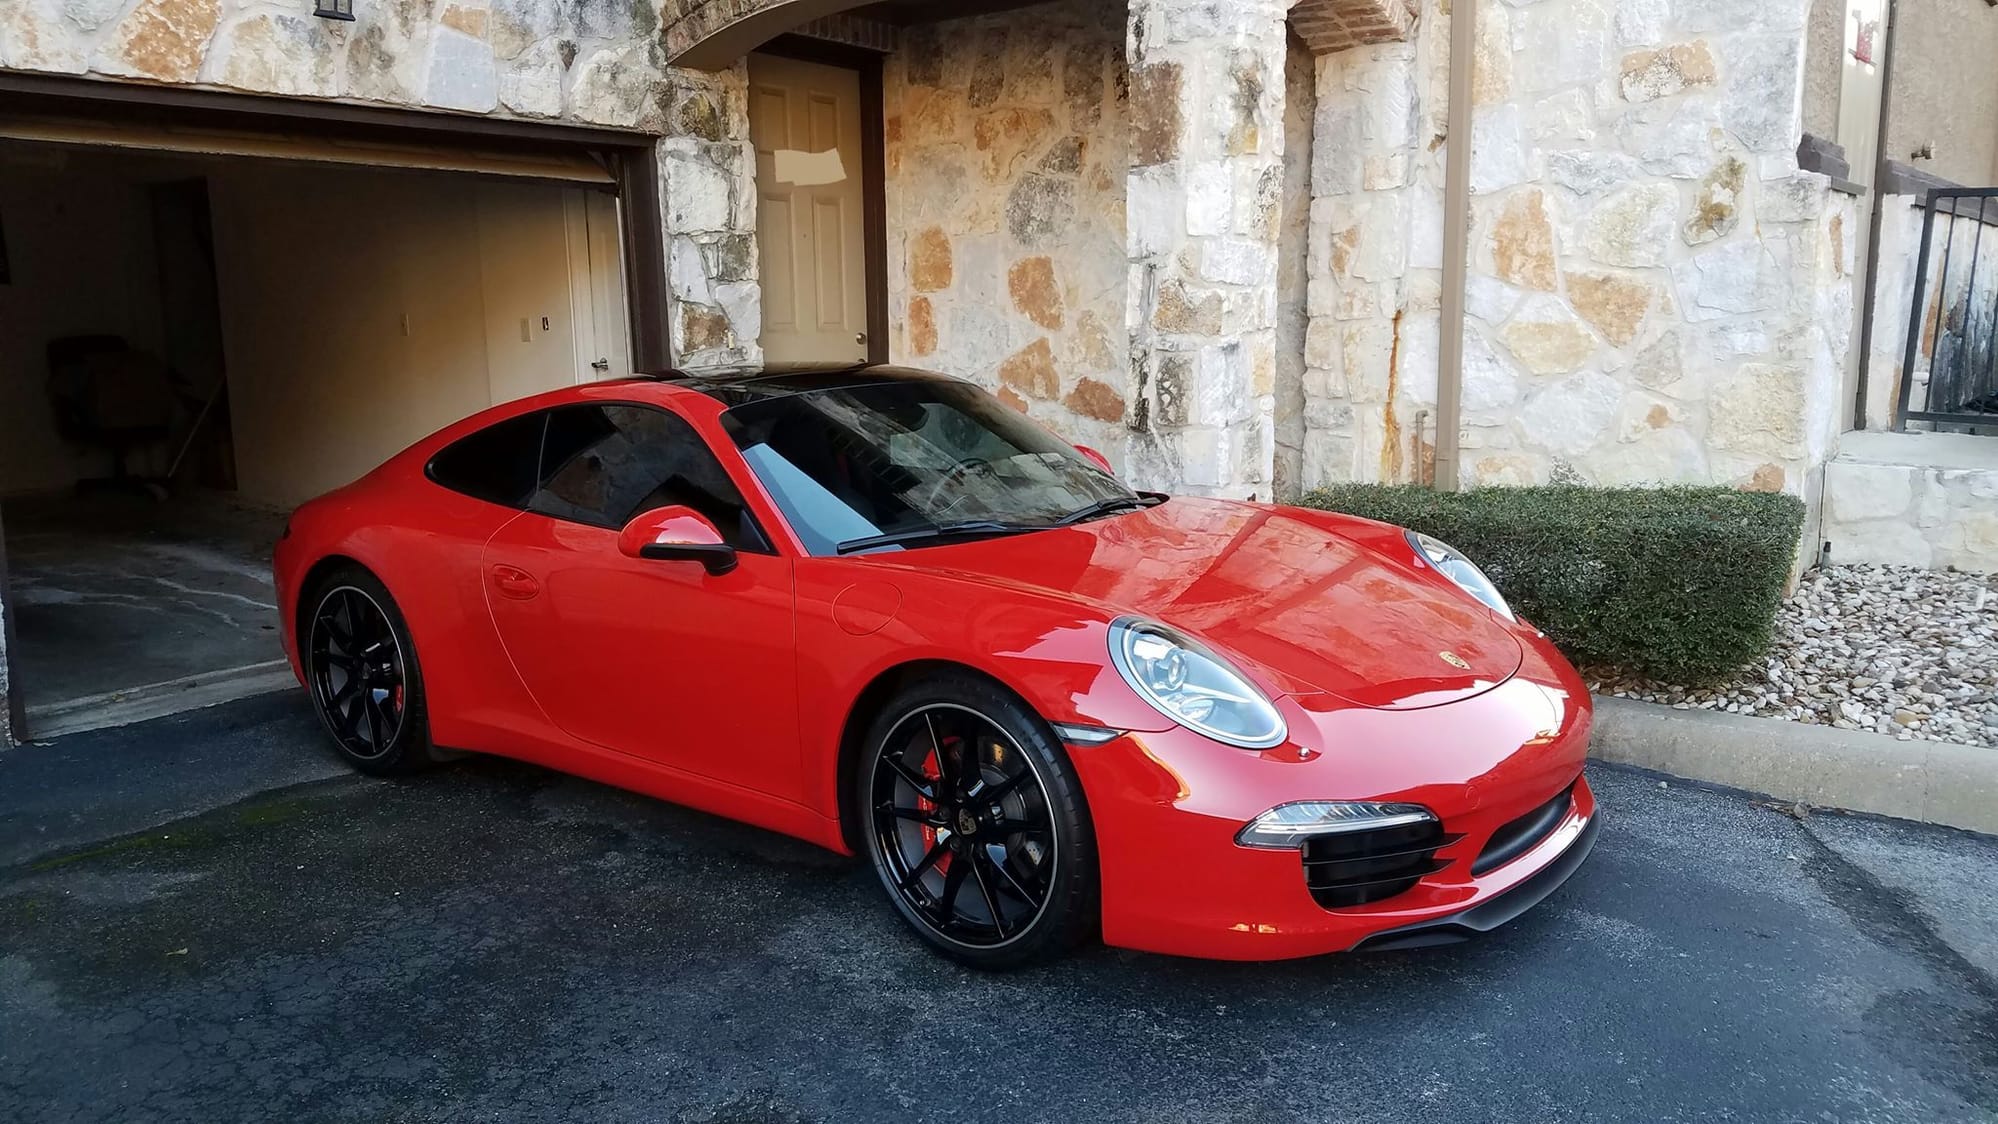 2014 Porsche 911 - 2014 Carrera S 991.1 C2S Manual 118k MSRP (PSE, Sport Chrono, PDLS, 18 ways, etc) - Used - VIN WP0AB2A90ES120352 - 39,432 Miles - 6 cyl - 2WD - Manual - Coupe - Red - Austin, TX 78759, United States